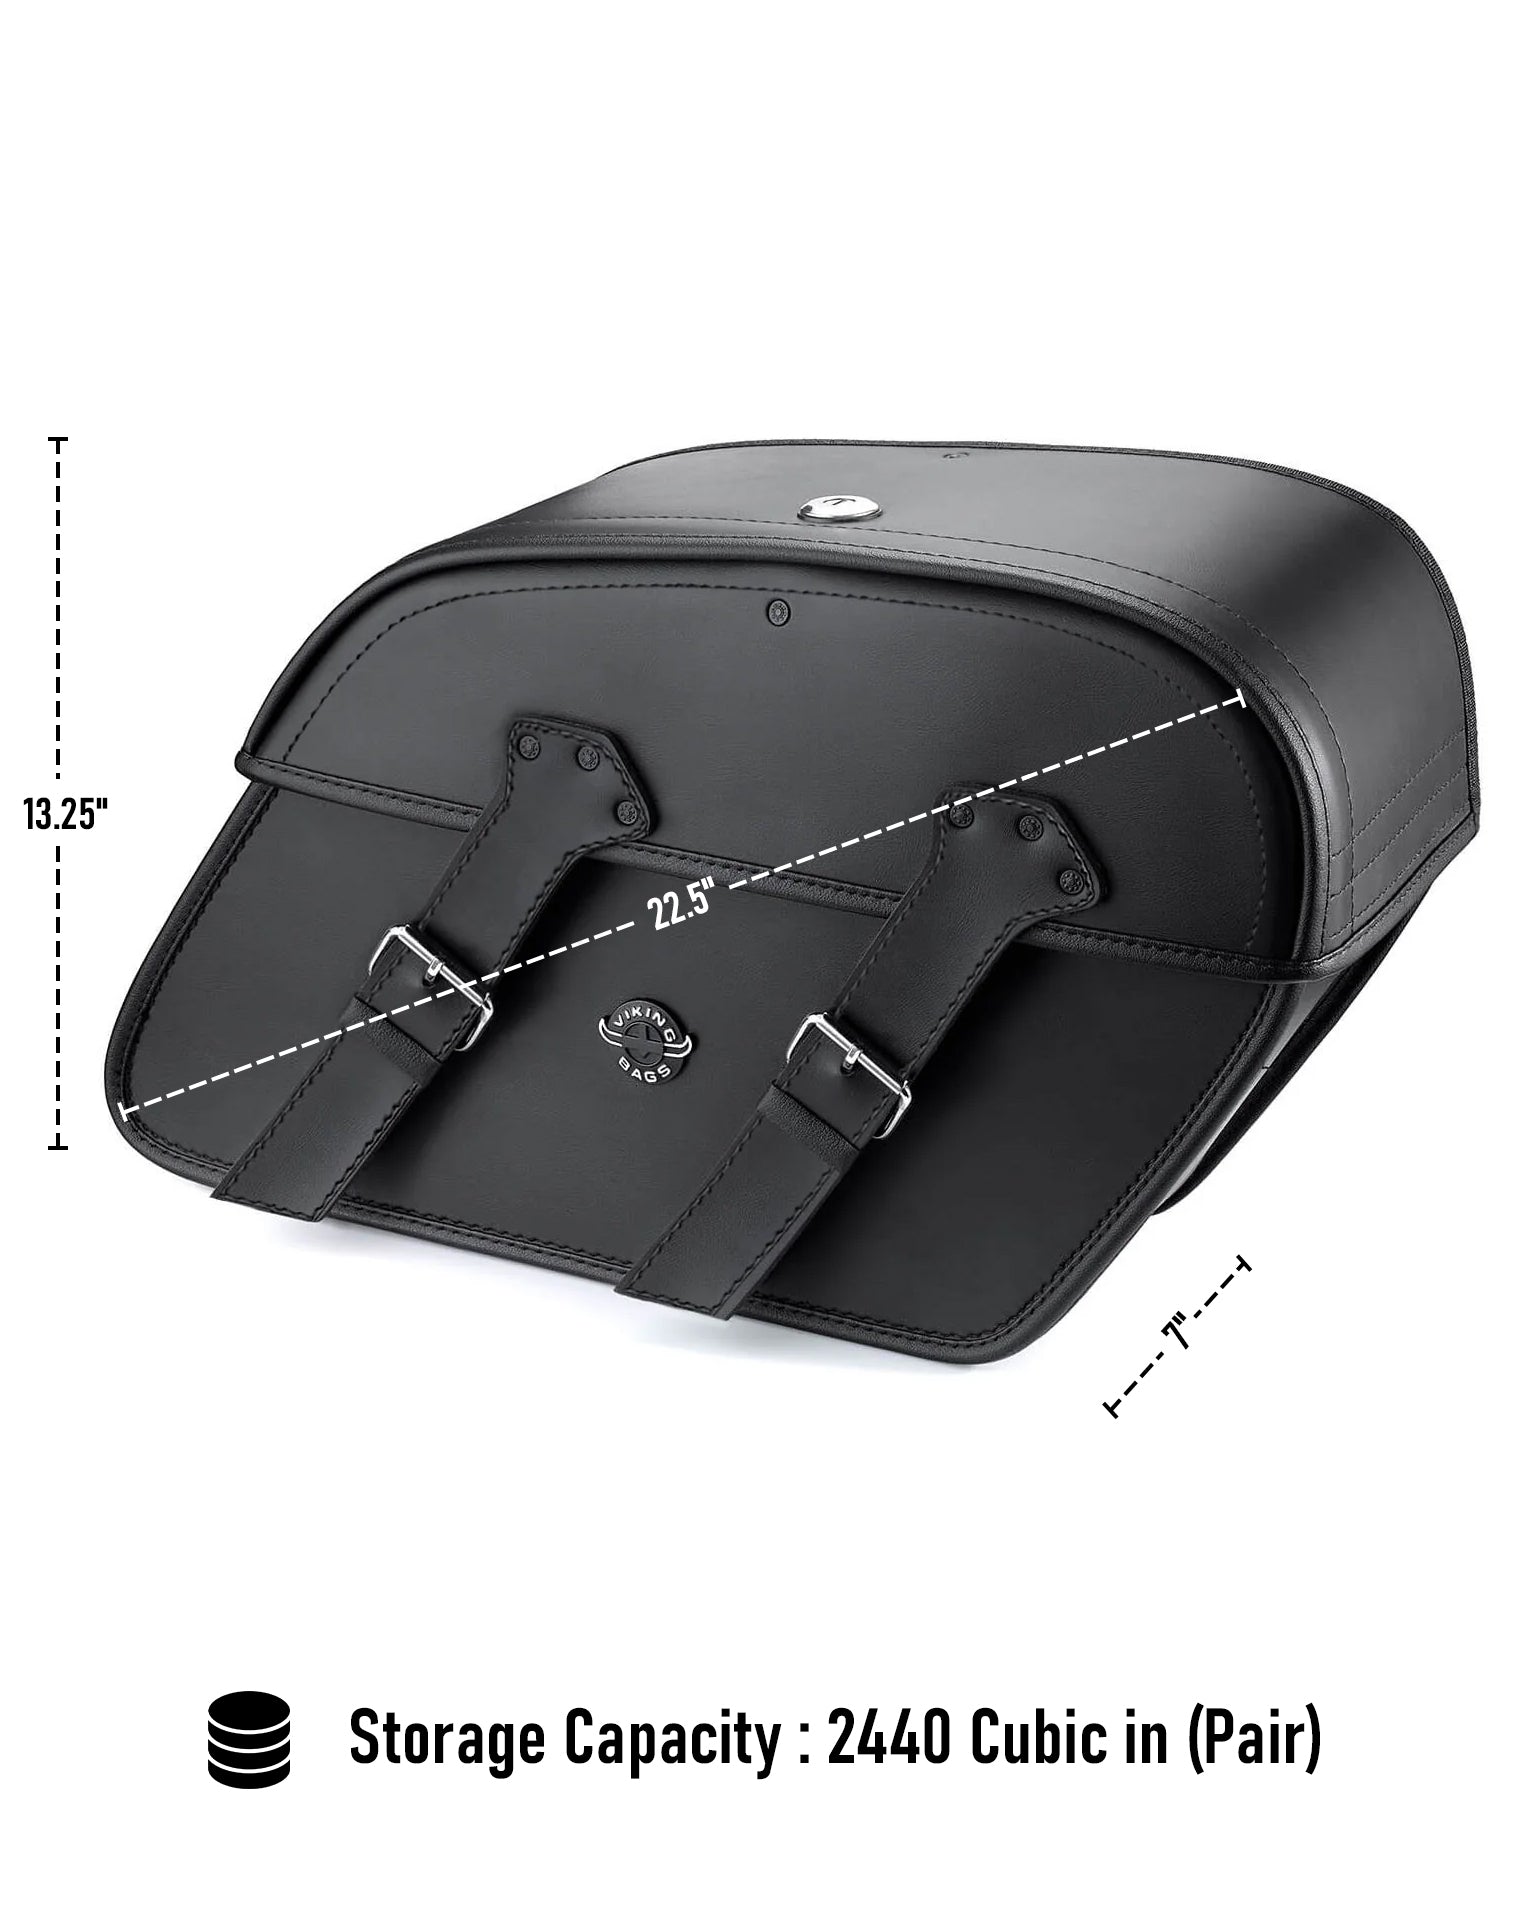 Viking Raven Extra Large Leather Motorcycle Saddlebags For Harley Softail Low Rider Fxlr Can Store Your Ridings Gears